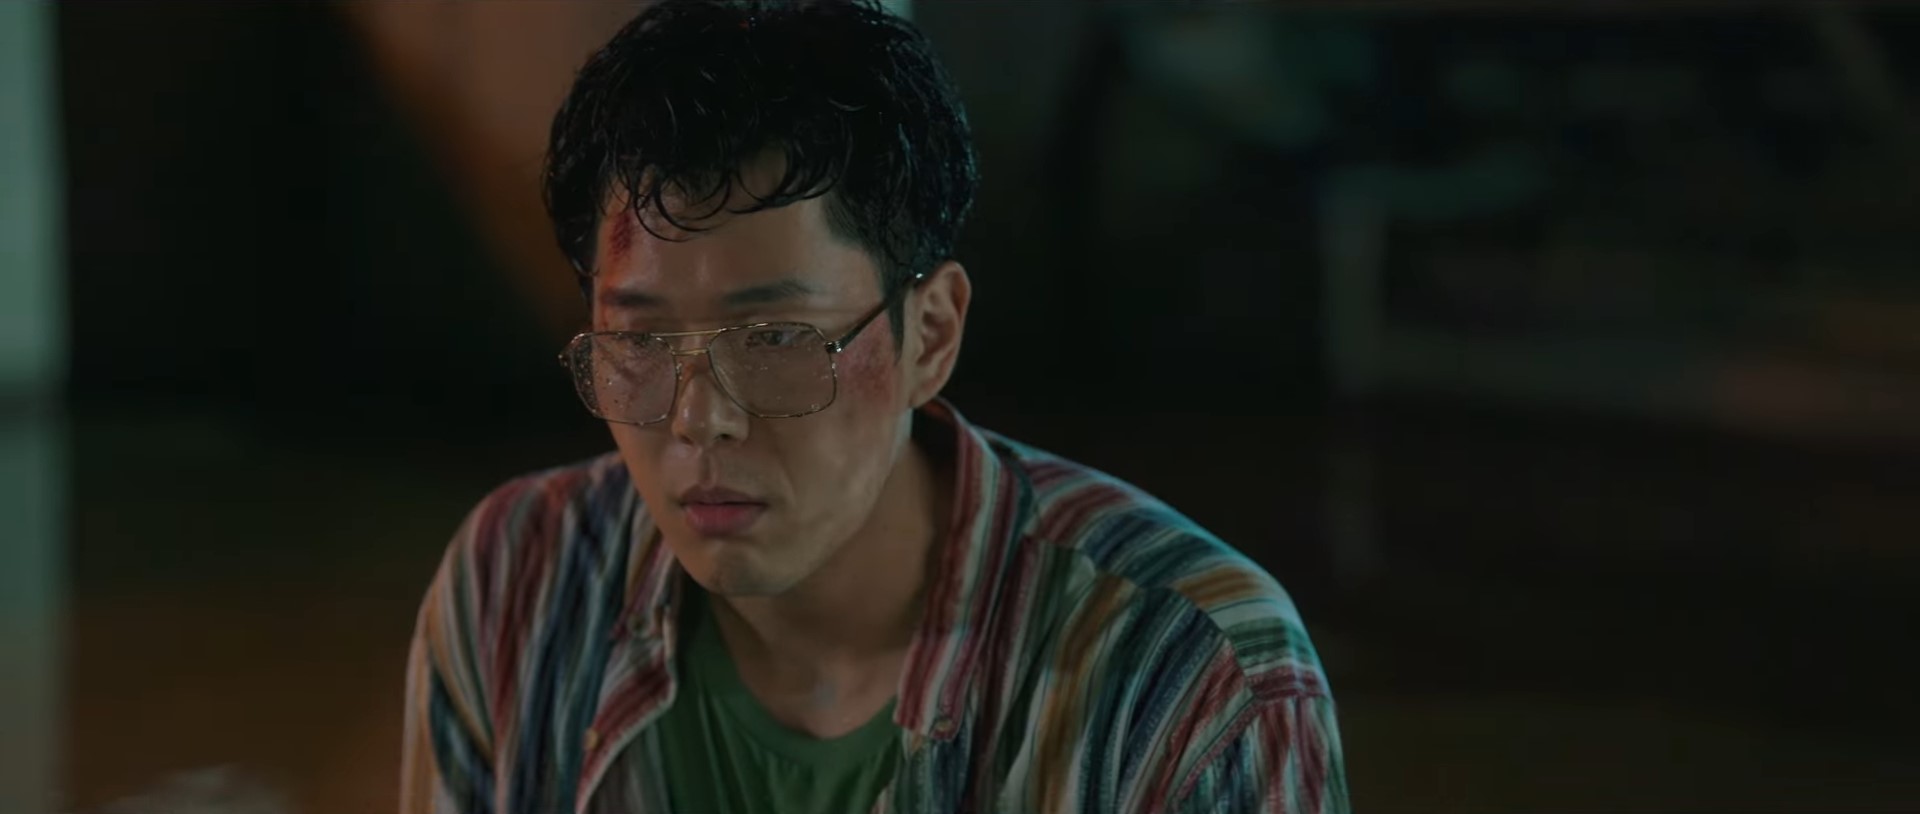 My Perfect Stranger Episode 8 Preview: When Will It Release? What Happens Next?